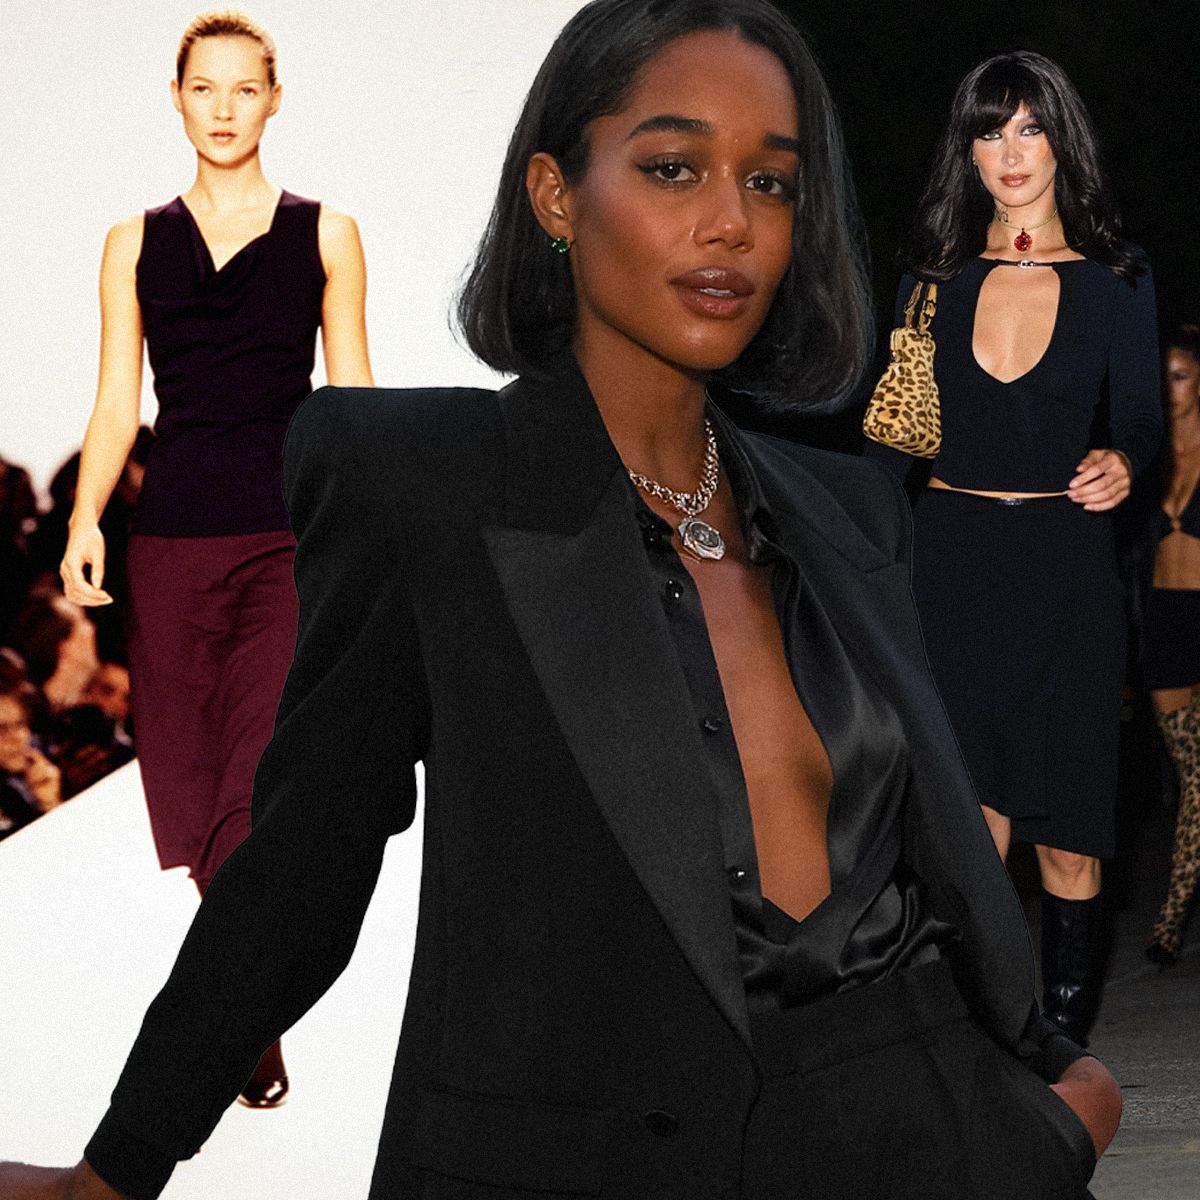 Office siren' trend makes this forgotten fashion chic, sexy — again